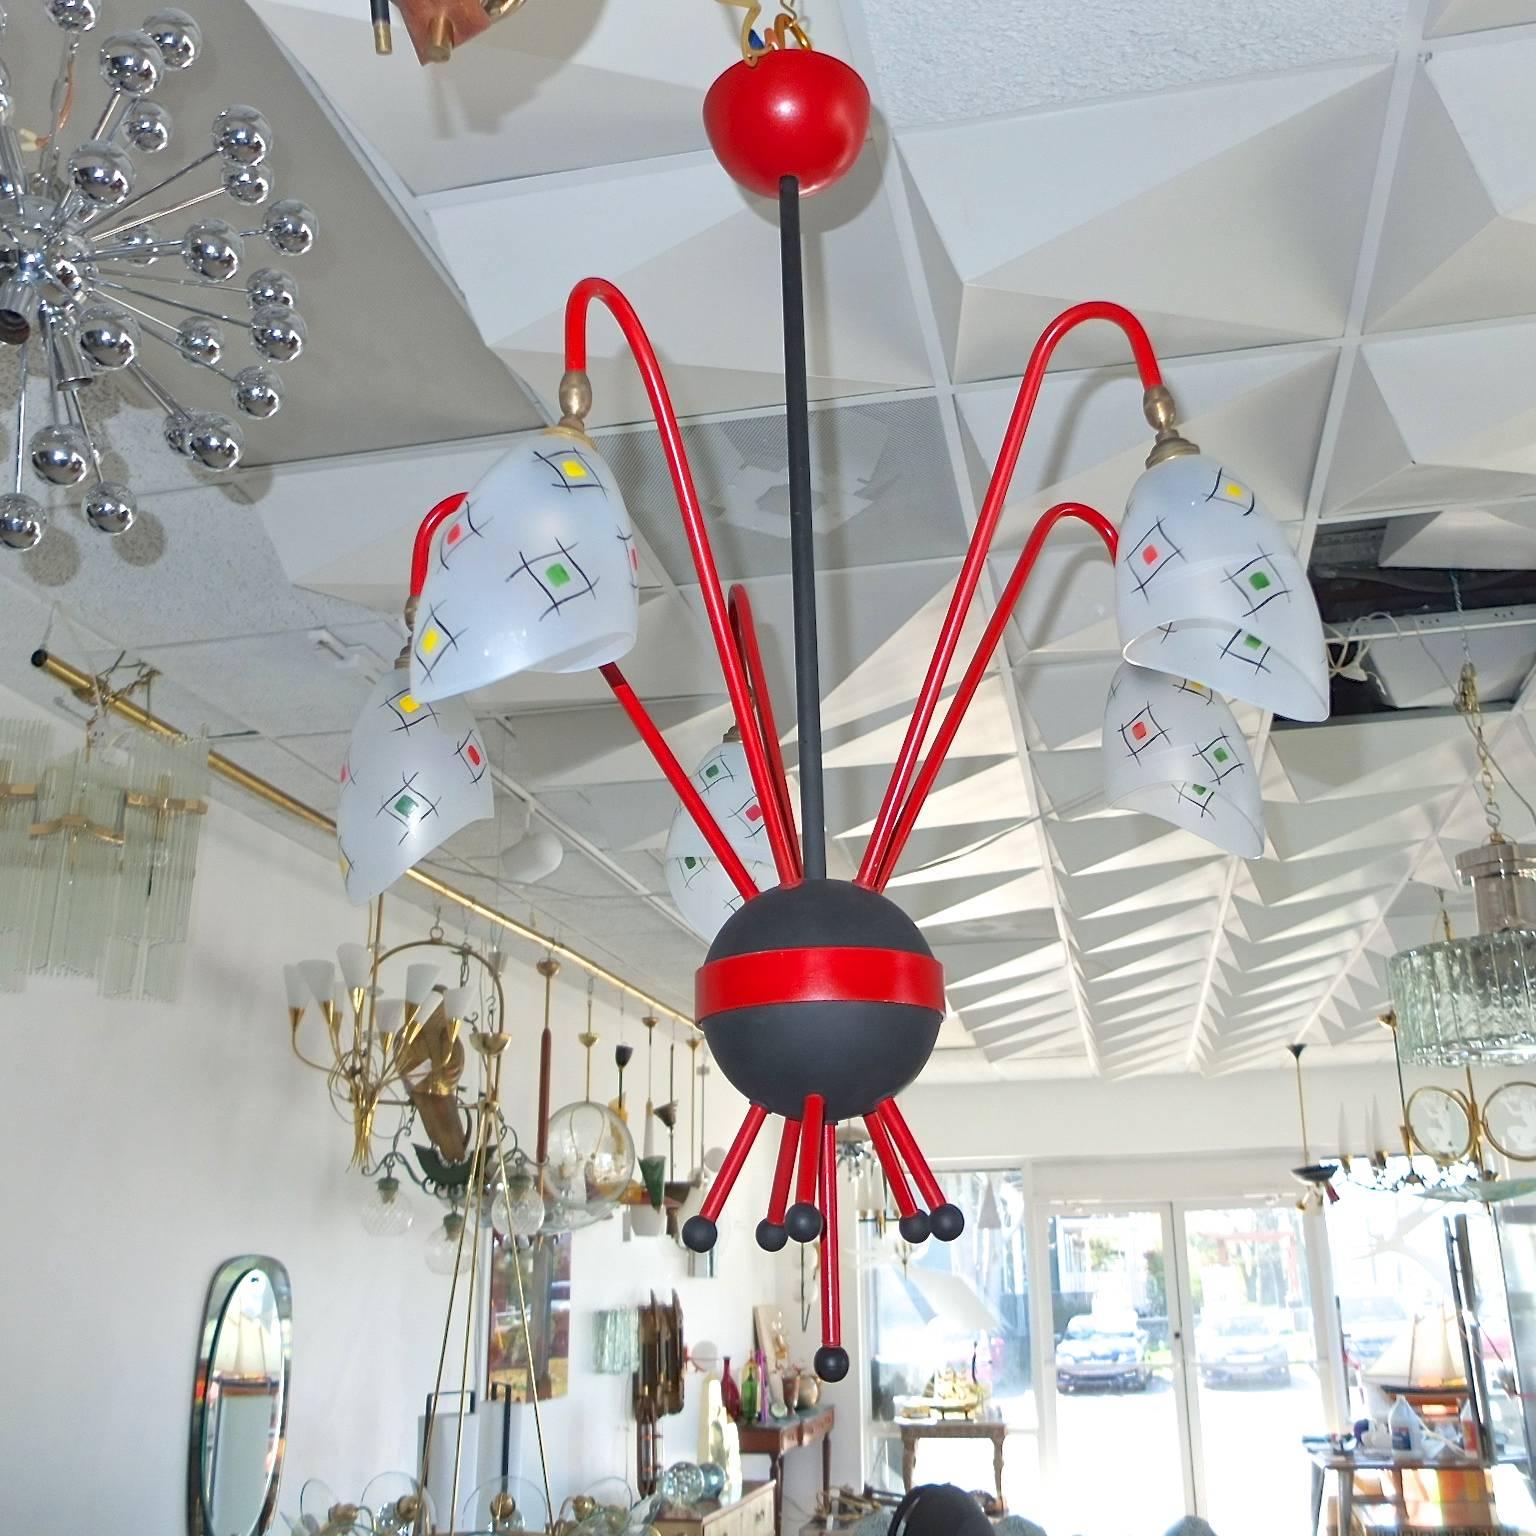 Mid-Century French chandelier, circa 1957. Red and black enameled cast aluminium 'nucleus' orb with five curved arms radiating like protons and electrons spinning around an atom. Multi-color abstract googie designs on satin glass shades which